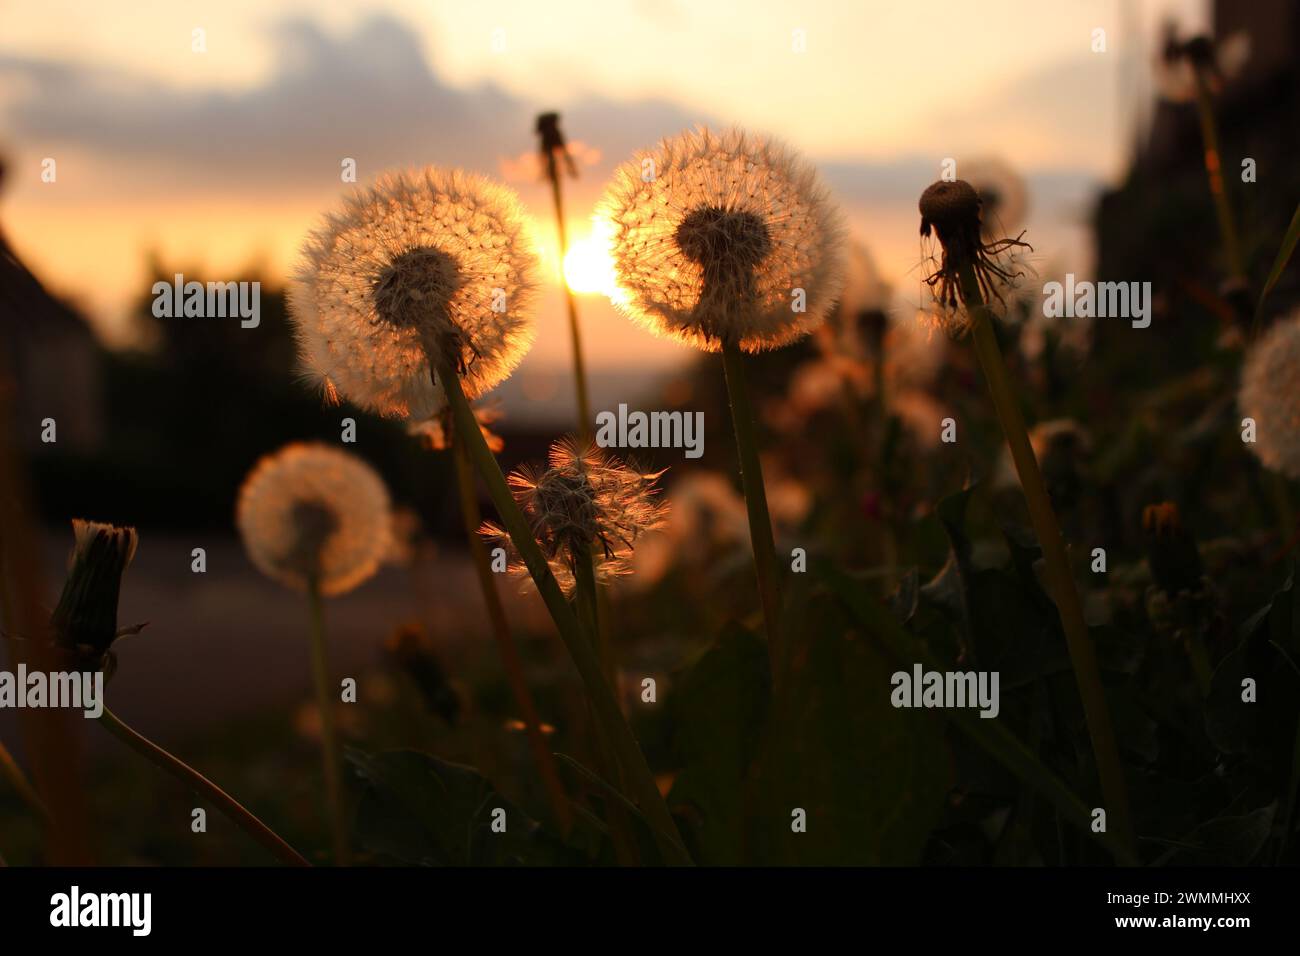 Glowing dandelion (Taraxacum officinale) seedheads at sunset - natural warm wallpaper, screensaver, background. Weeds look stunning at golden hour Stock Photo